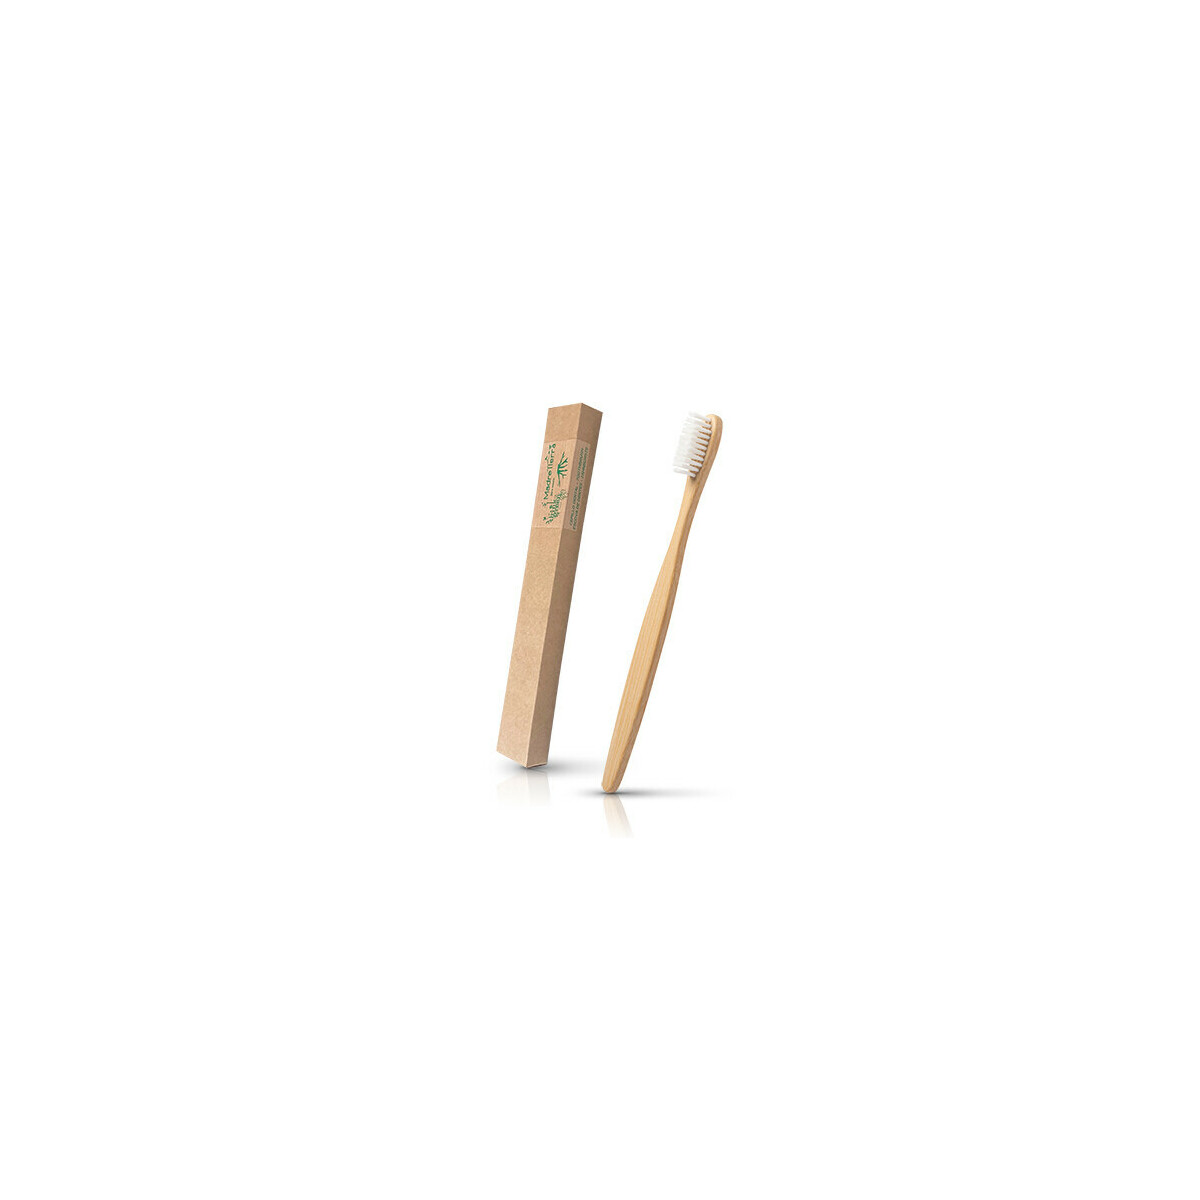 Bamboo toothbrush in a box | Standard